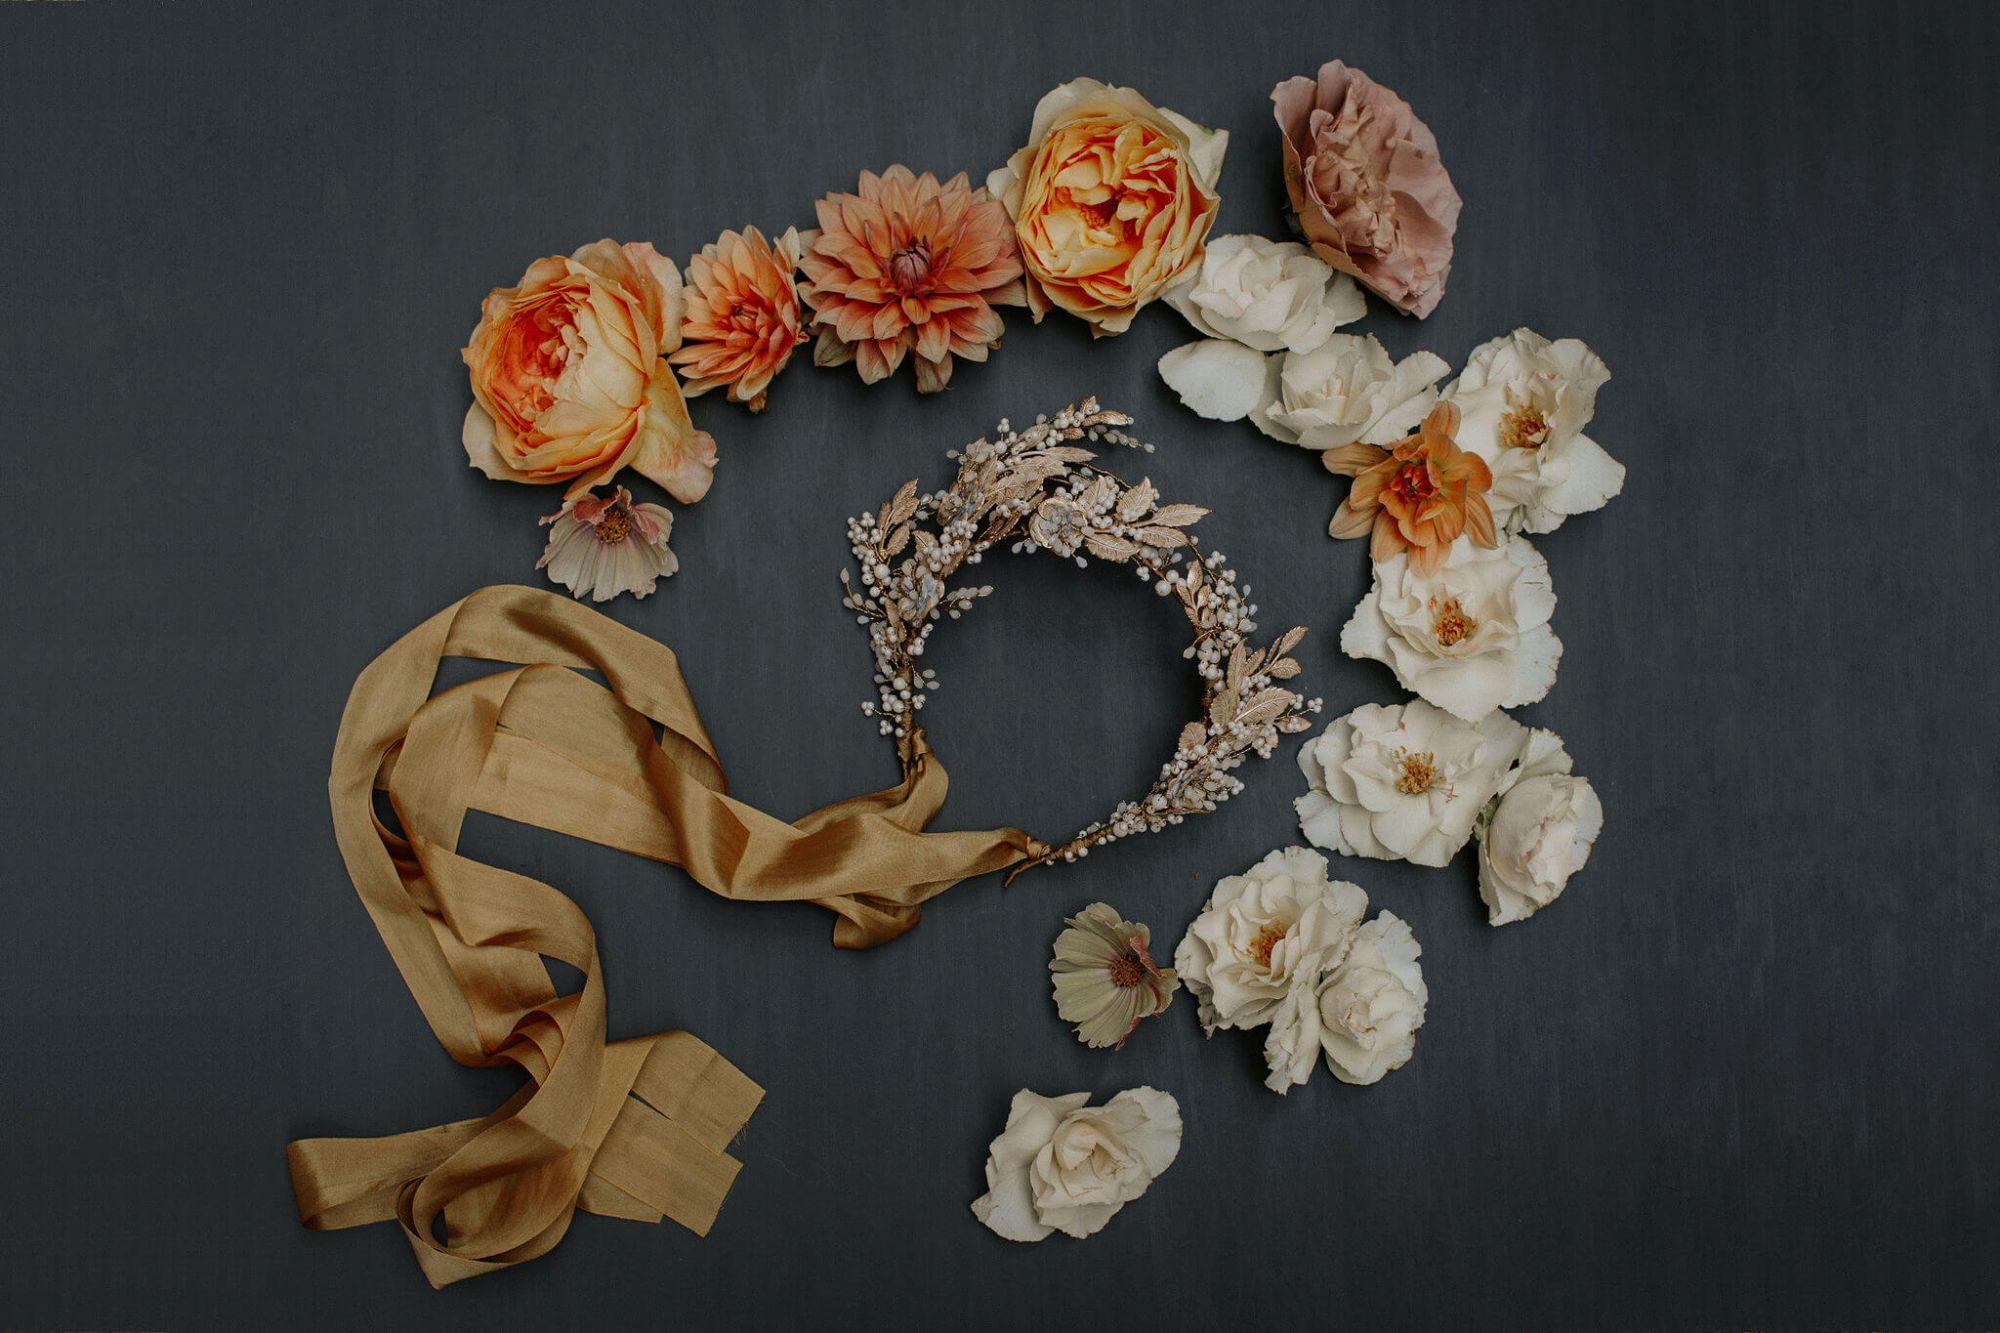 This image shows a statement gold floral bridal headdress amongst ivory and coral flowers 